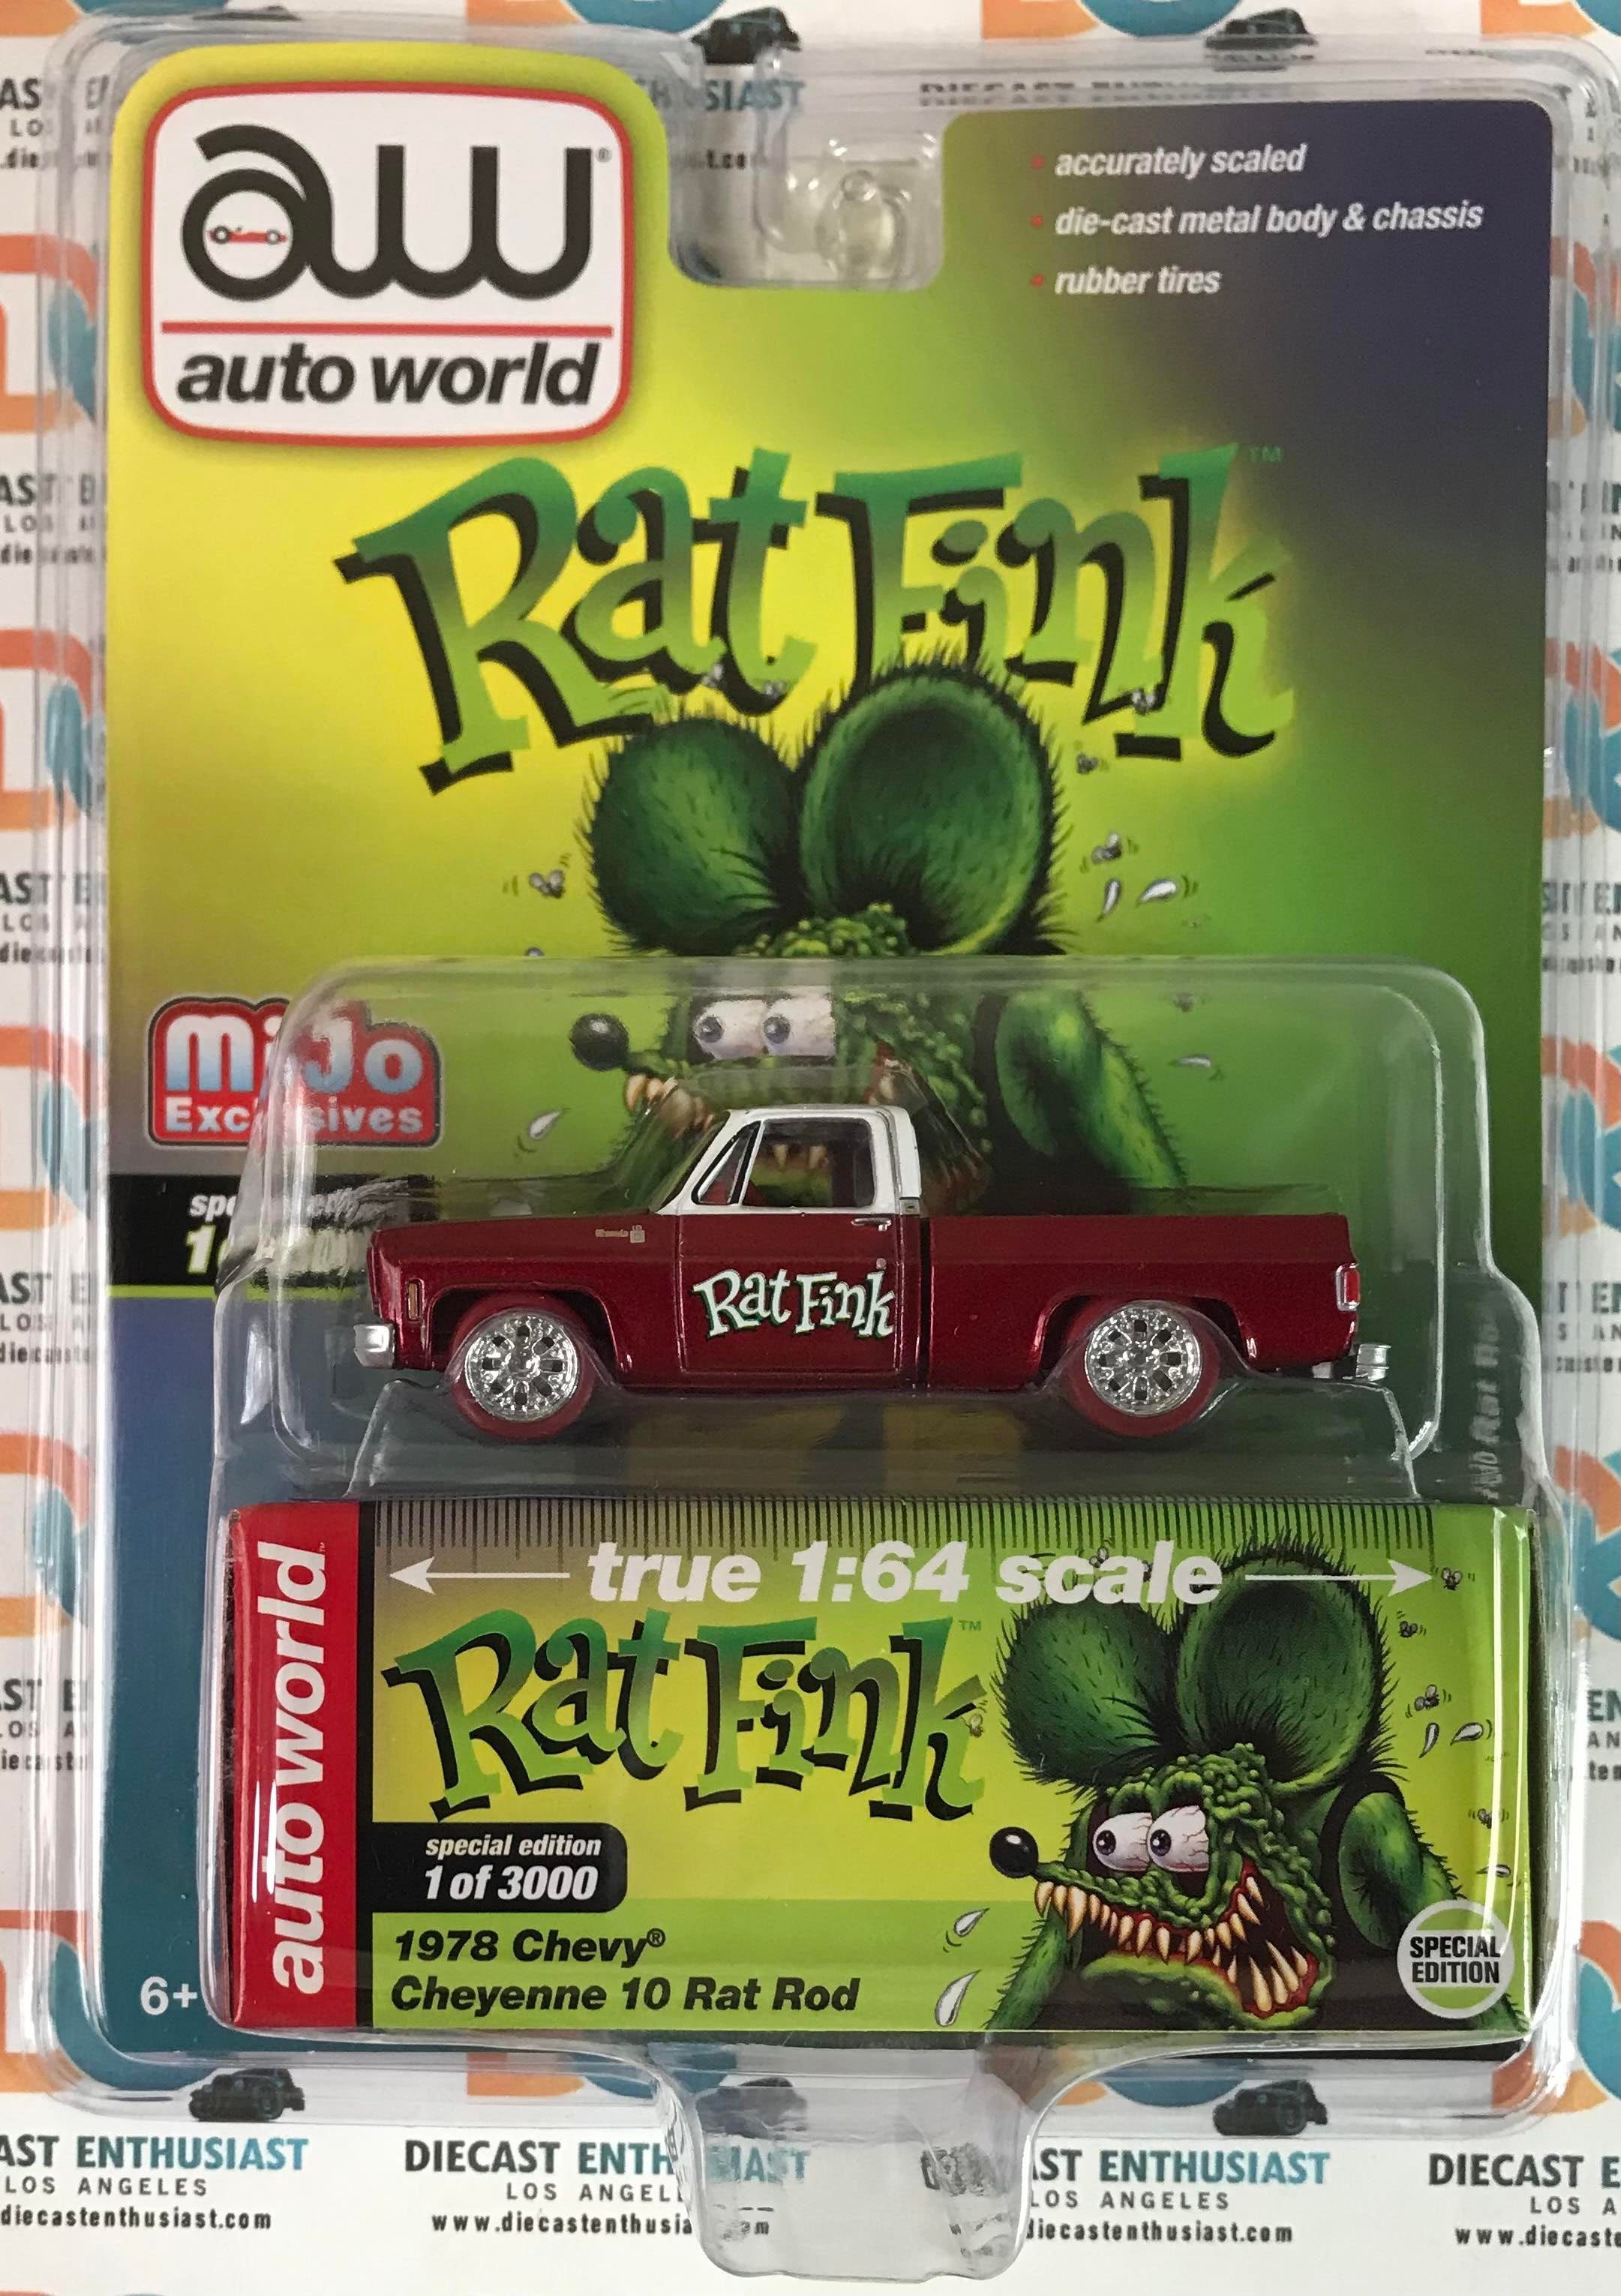 CHASE Auto World Mijo Exclusives Rat Fink 1978 Chevy Cheyenne 10 Rat Rod &  Weathered 1:64